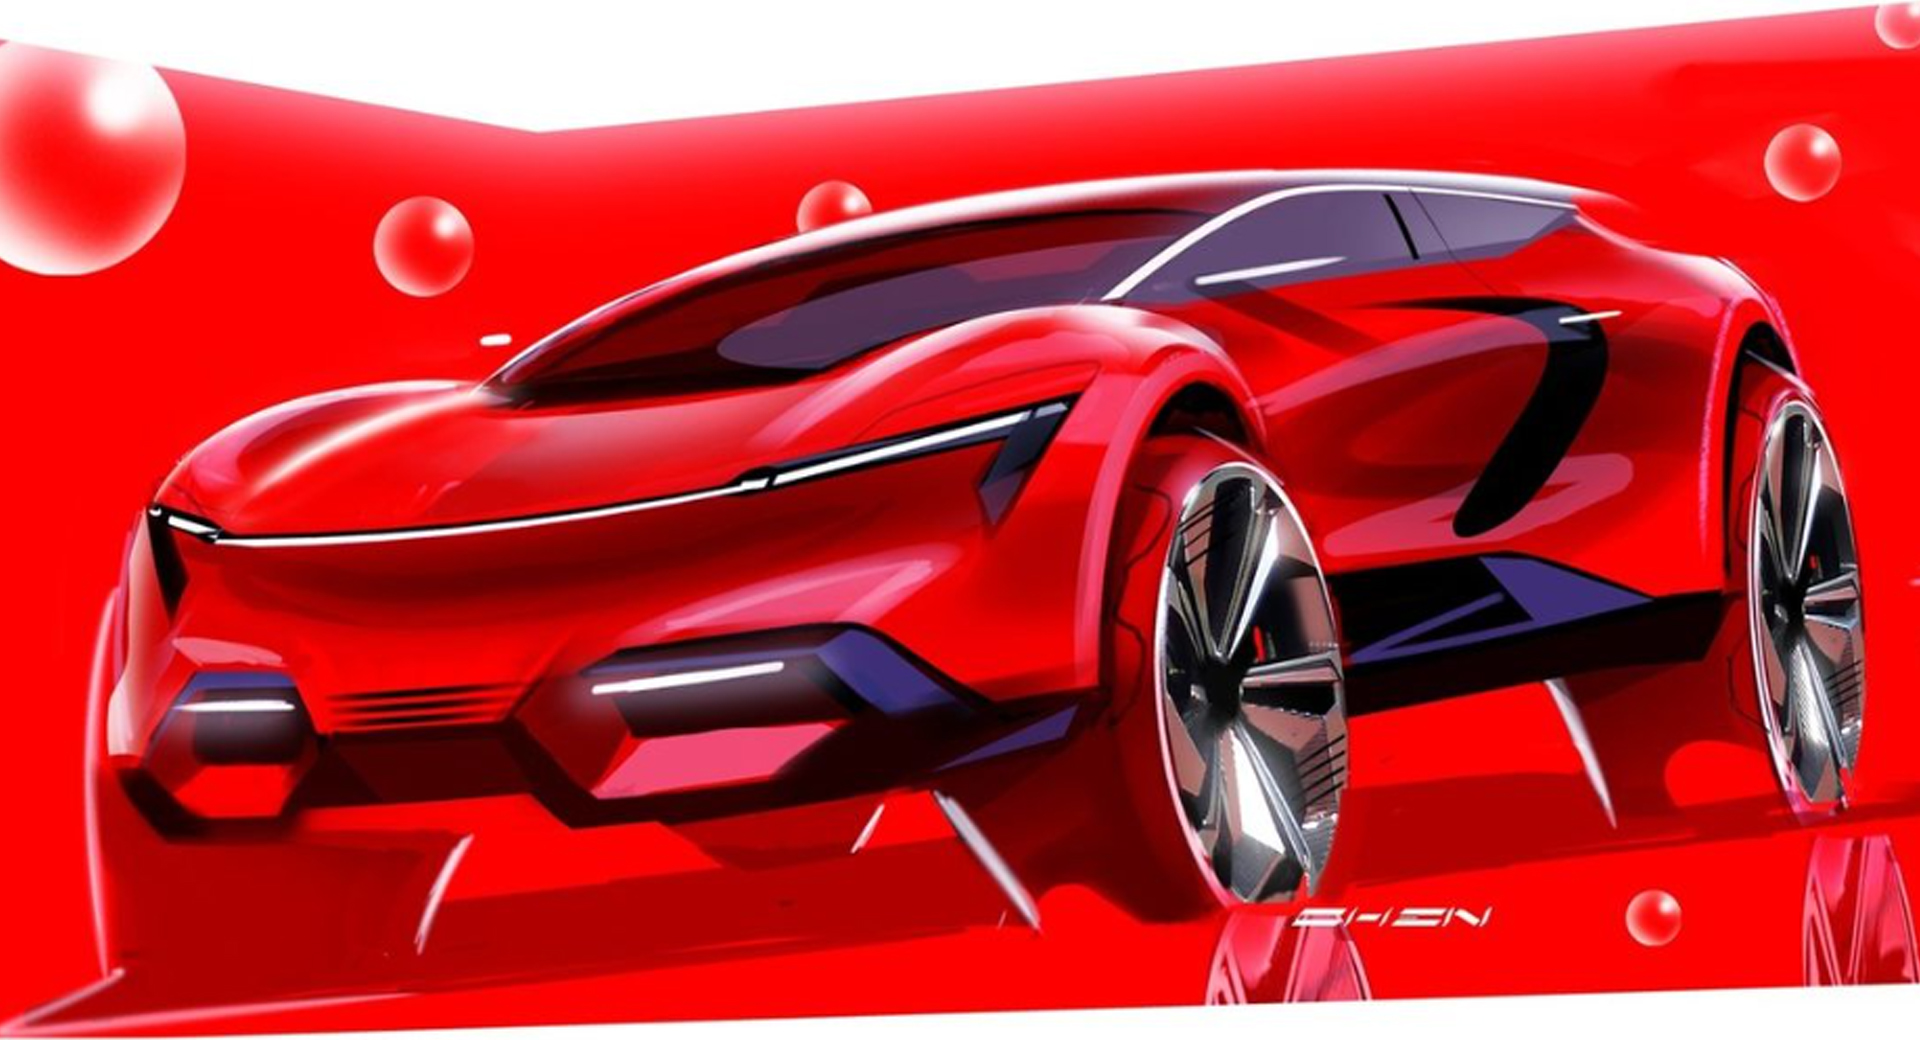 Design and sketch any car or vehicle concept by Yumyamu | Fiverr